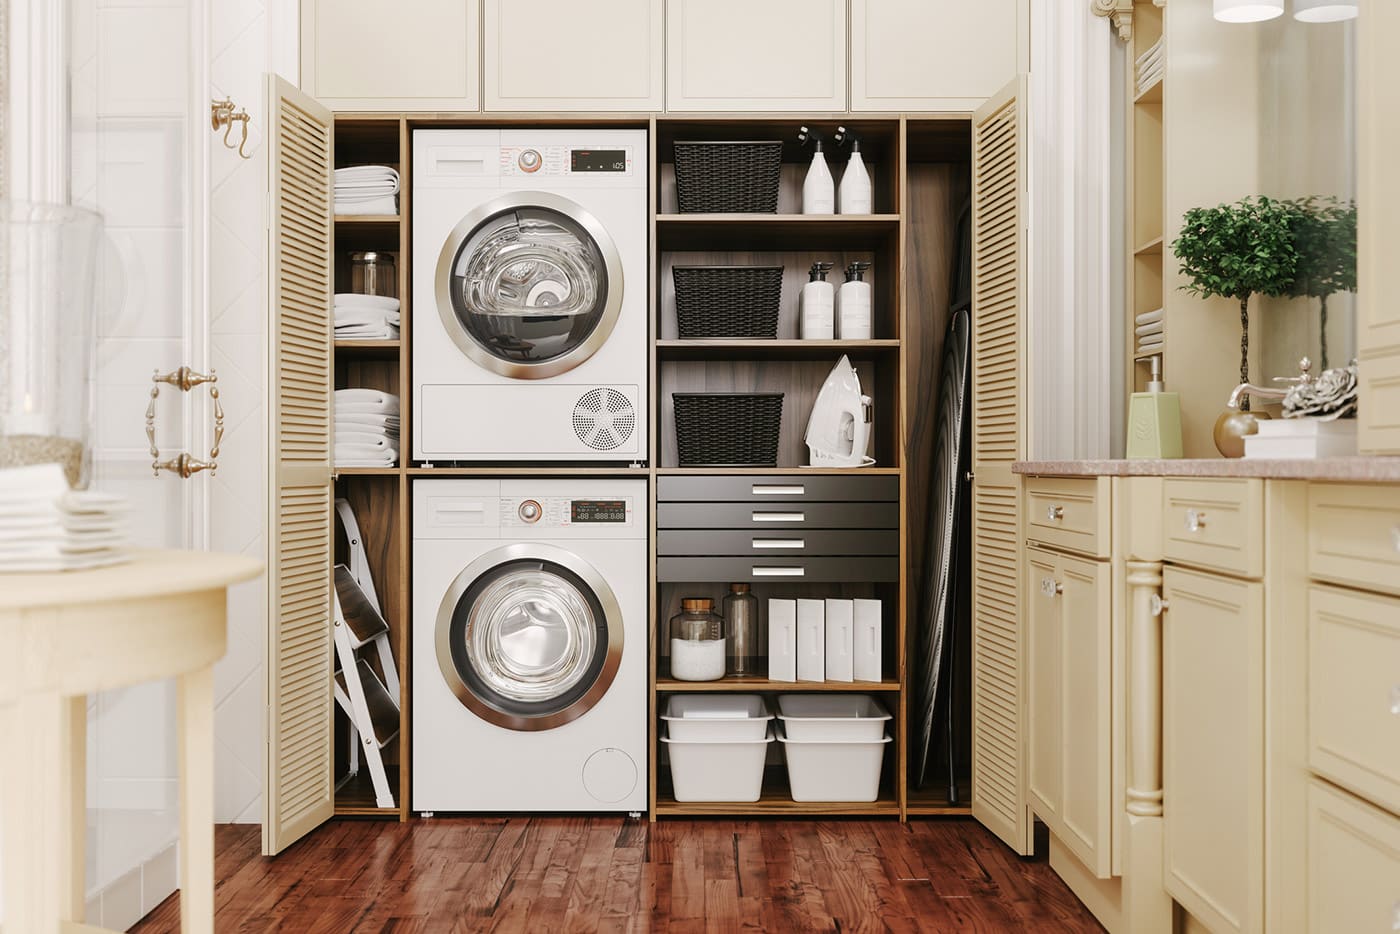 Tips for Remodeling & Upgrading Your Laundry Room